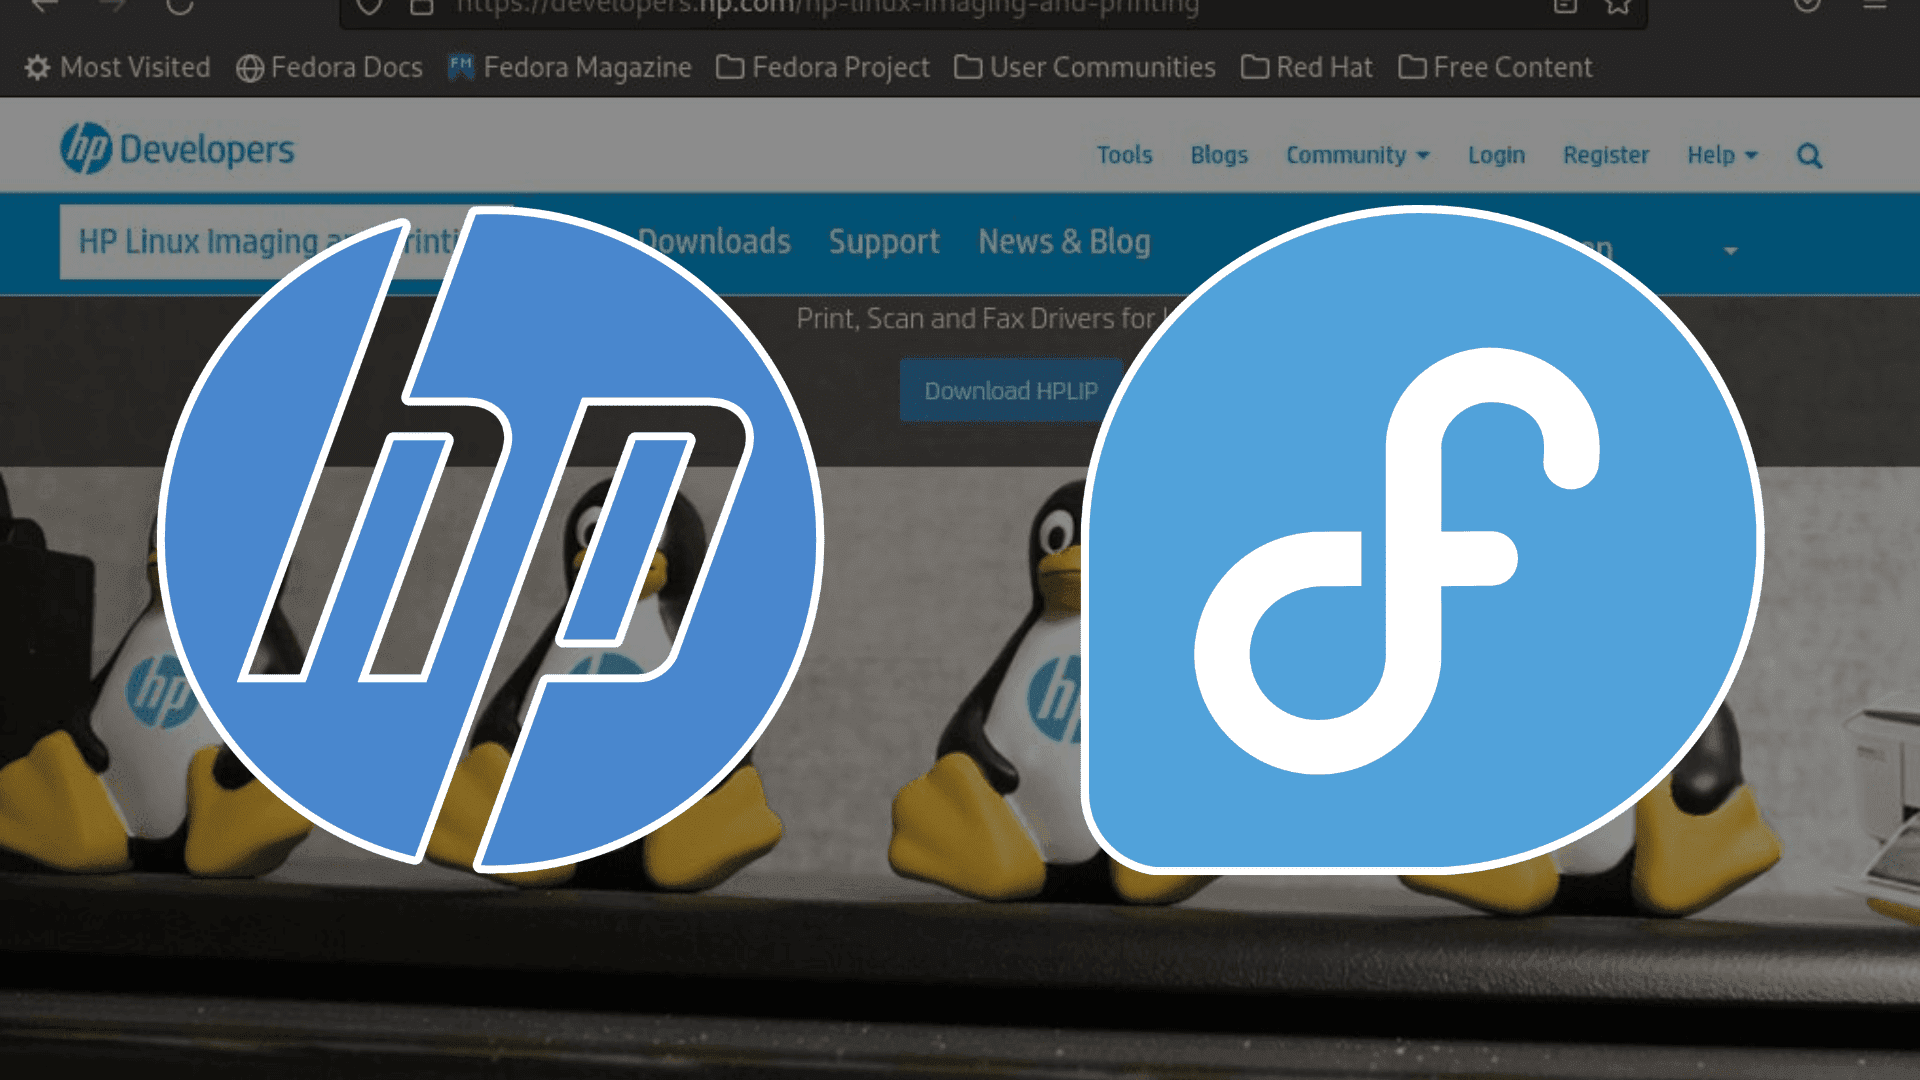 Step-by-step guide for installing HPLIP on Fedora Linux